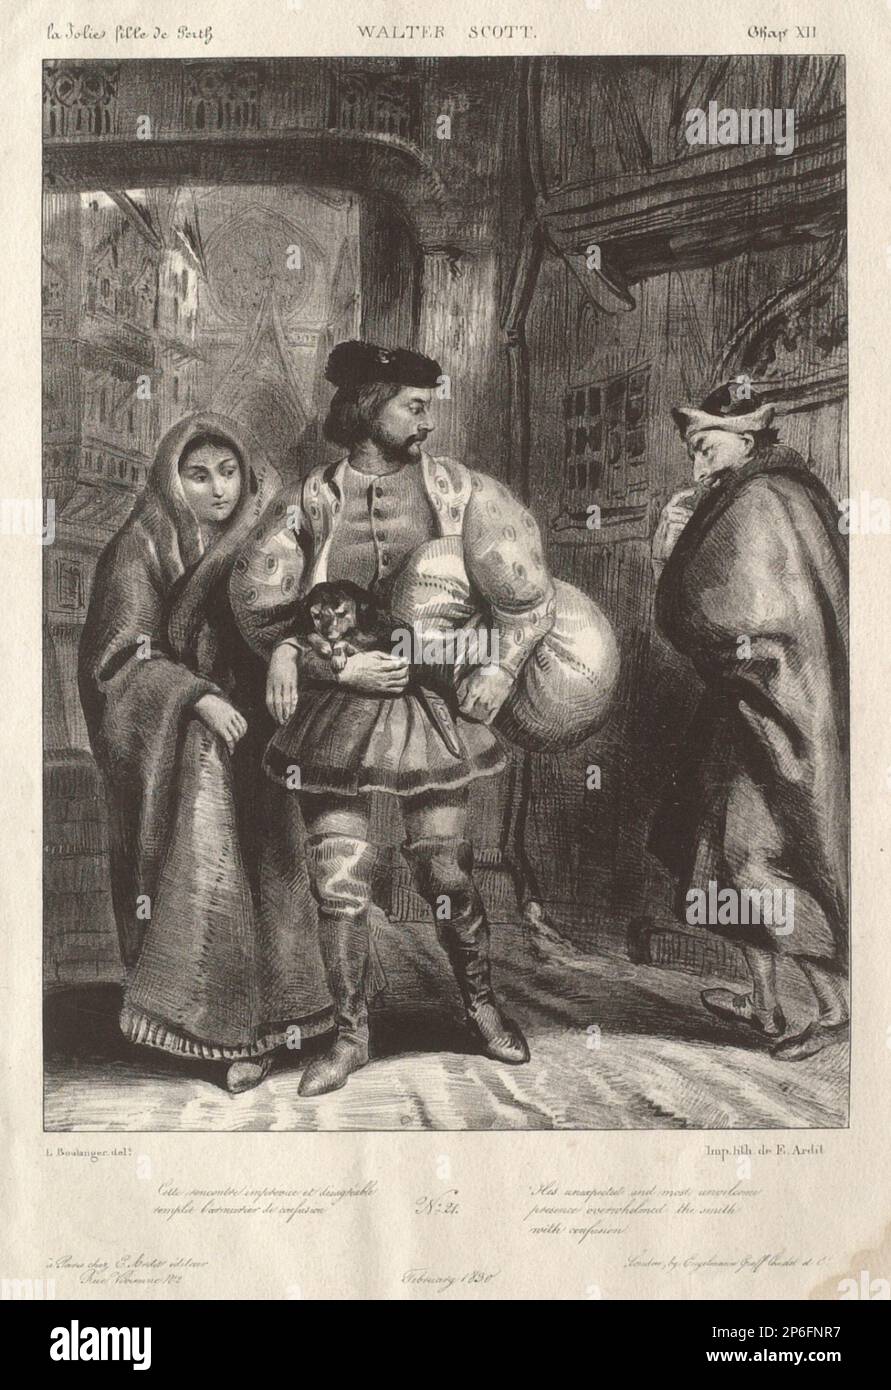 Louis Boulanger, Illustration for 'The Fair Maid of Perth' by Walter Scott, ch. 12, Feb. 1830, lithograph on wove paper. Stock Photo